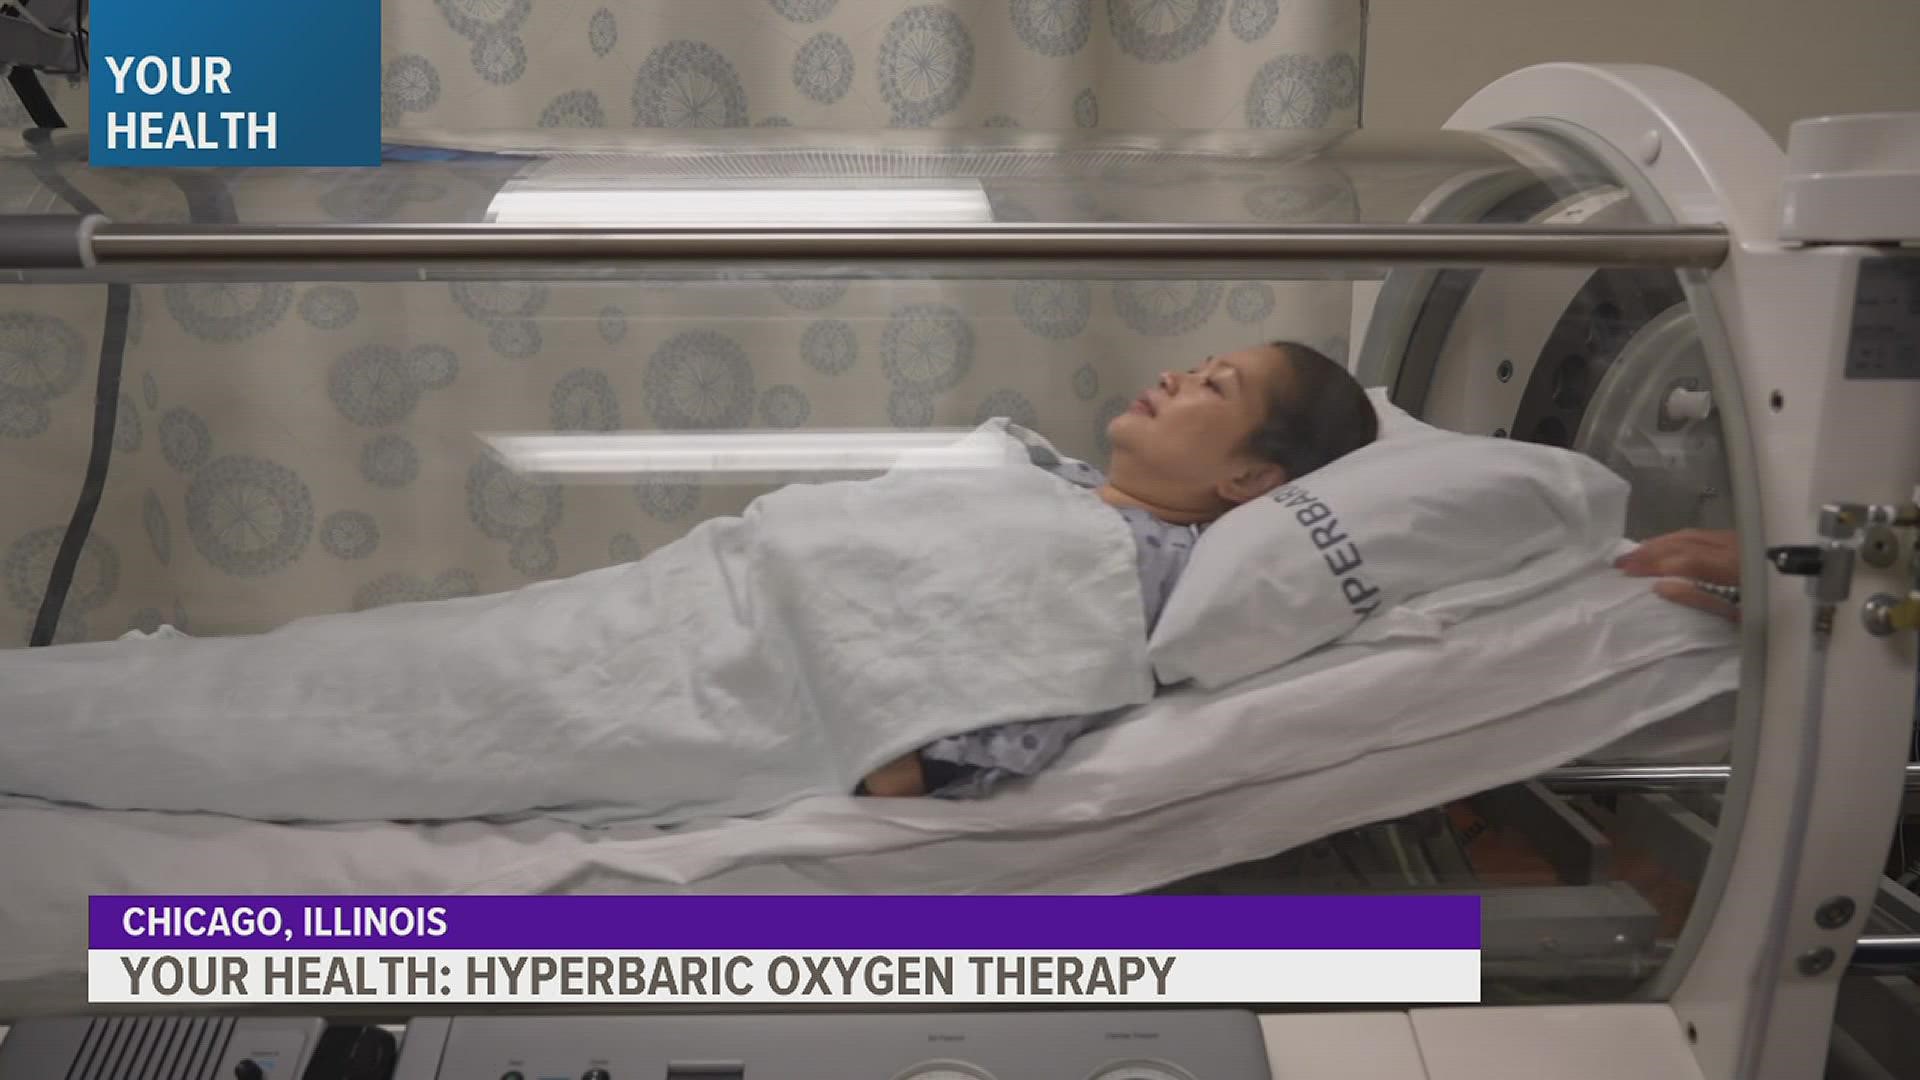 It's a painful, debilitating disease that impacts almost a million people, but now doctors are using hyperbaric oxygen therapy to treat it.